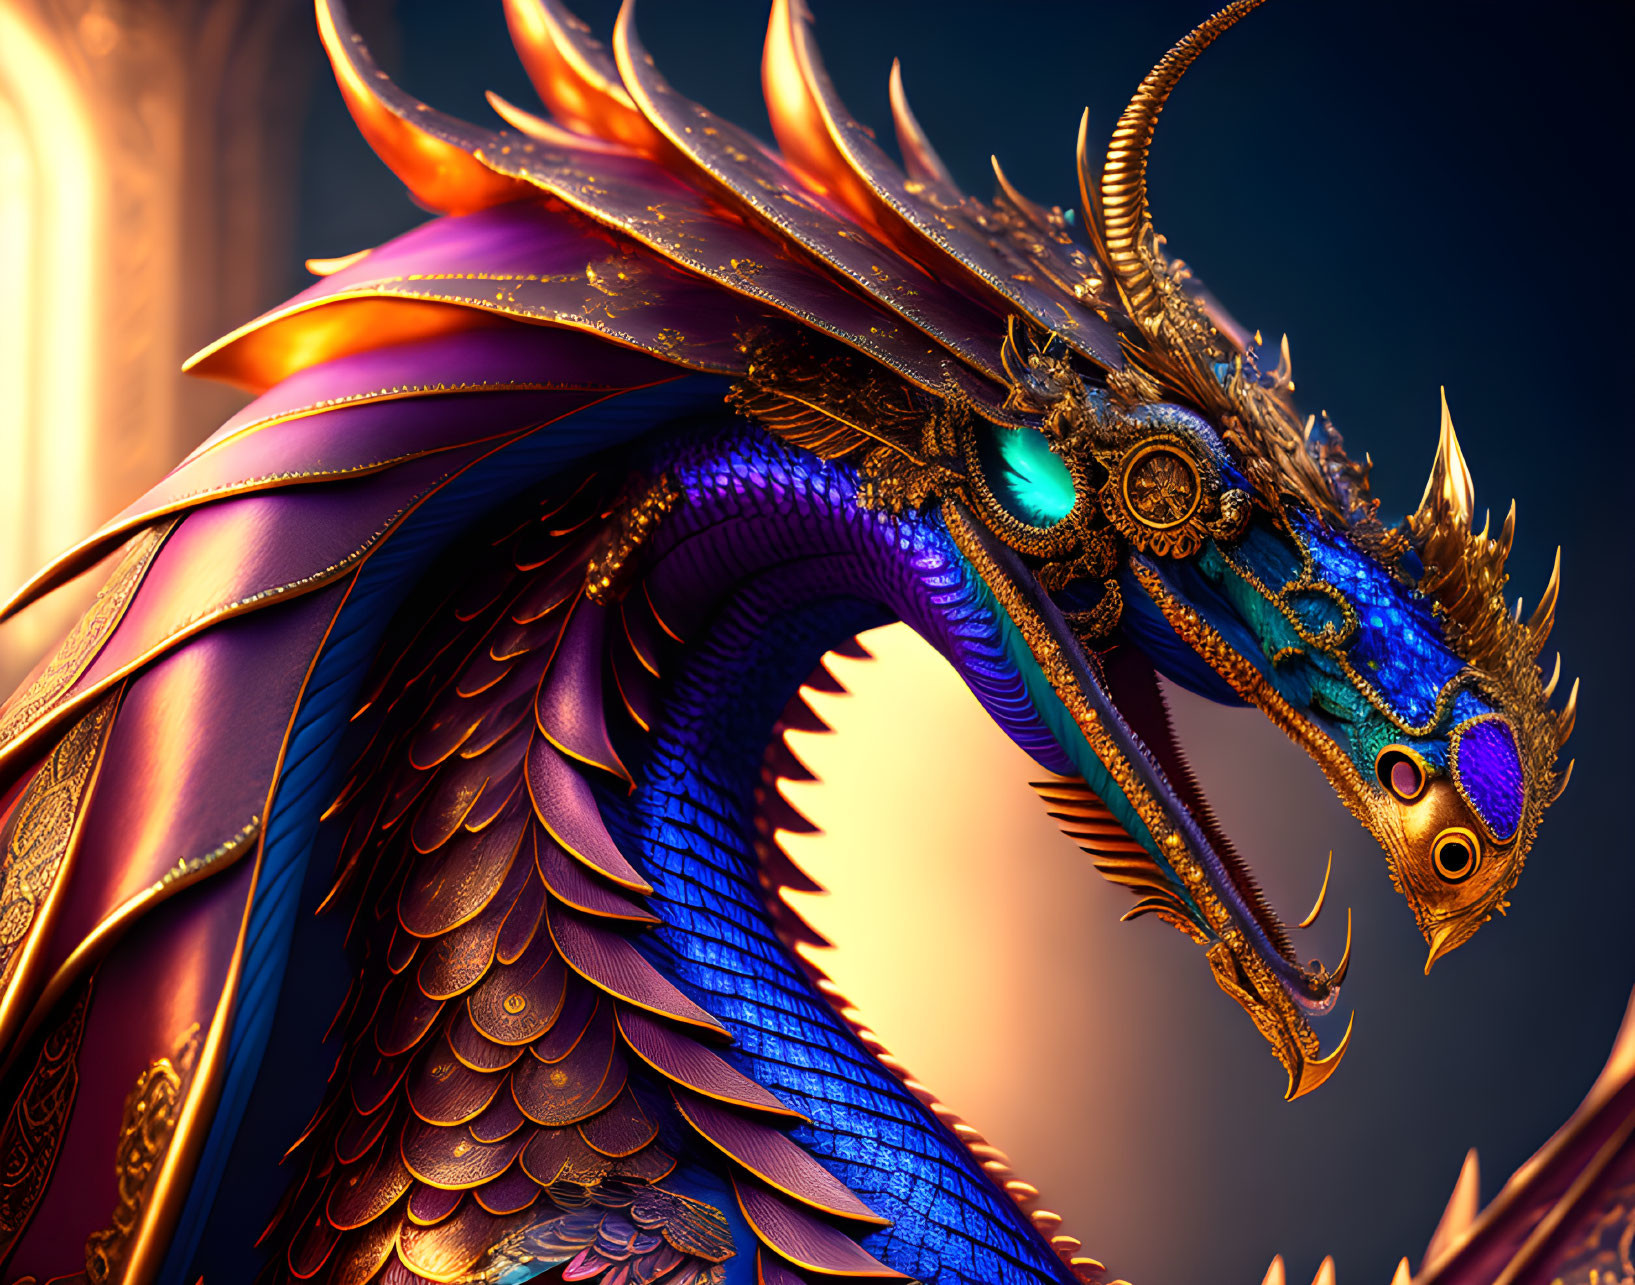 Majestic dragon with golden details, blue and purple scales, turquoise eyes